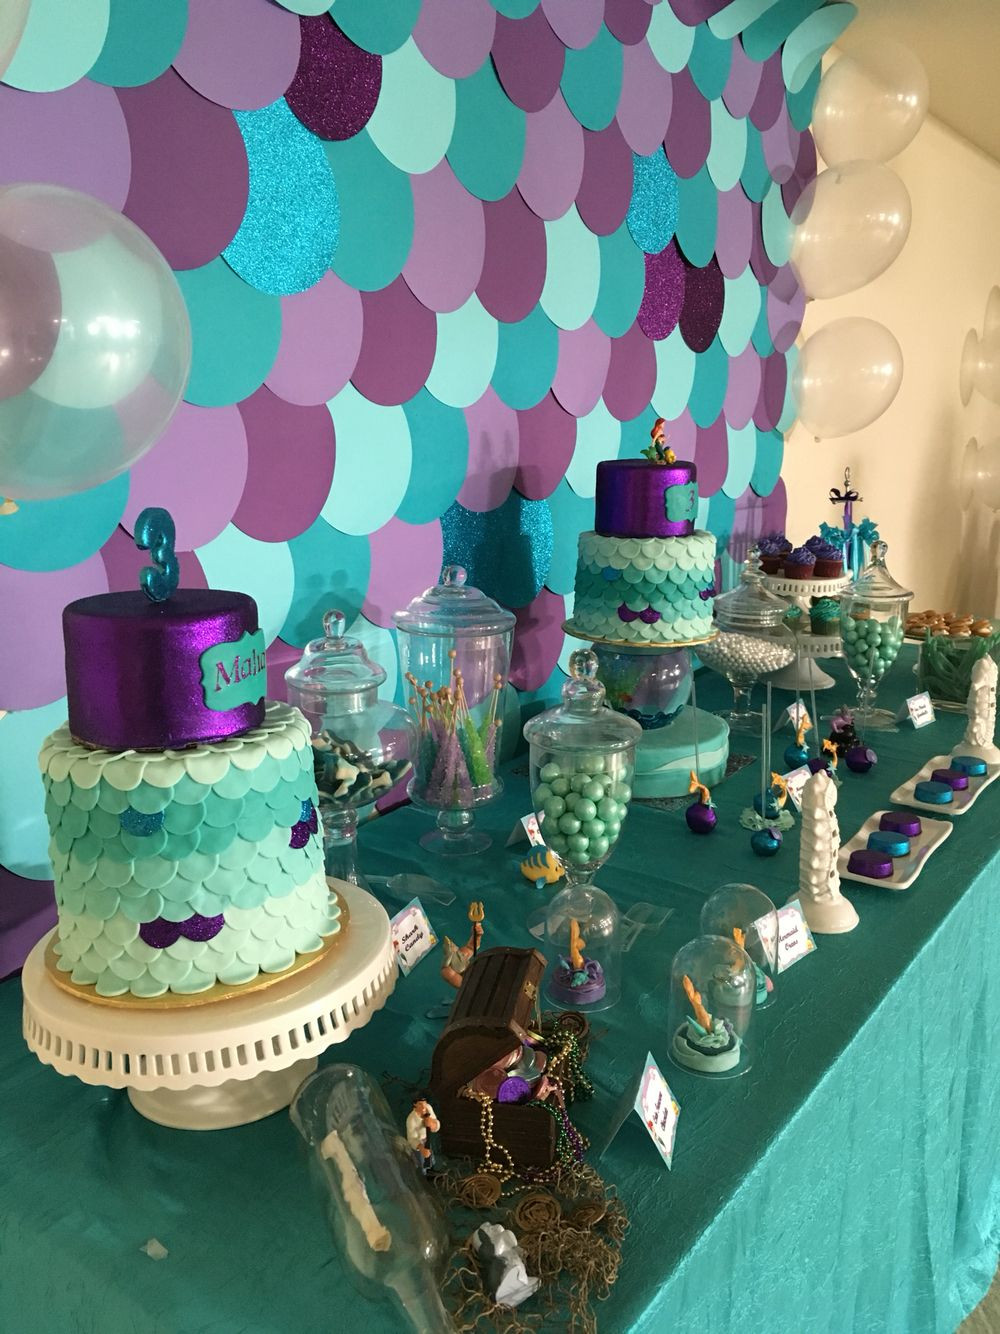 Little Mermaid Theme Party Ideas
 Little Mermaid Party by Flo and Erica in 2019